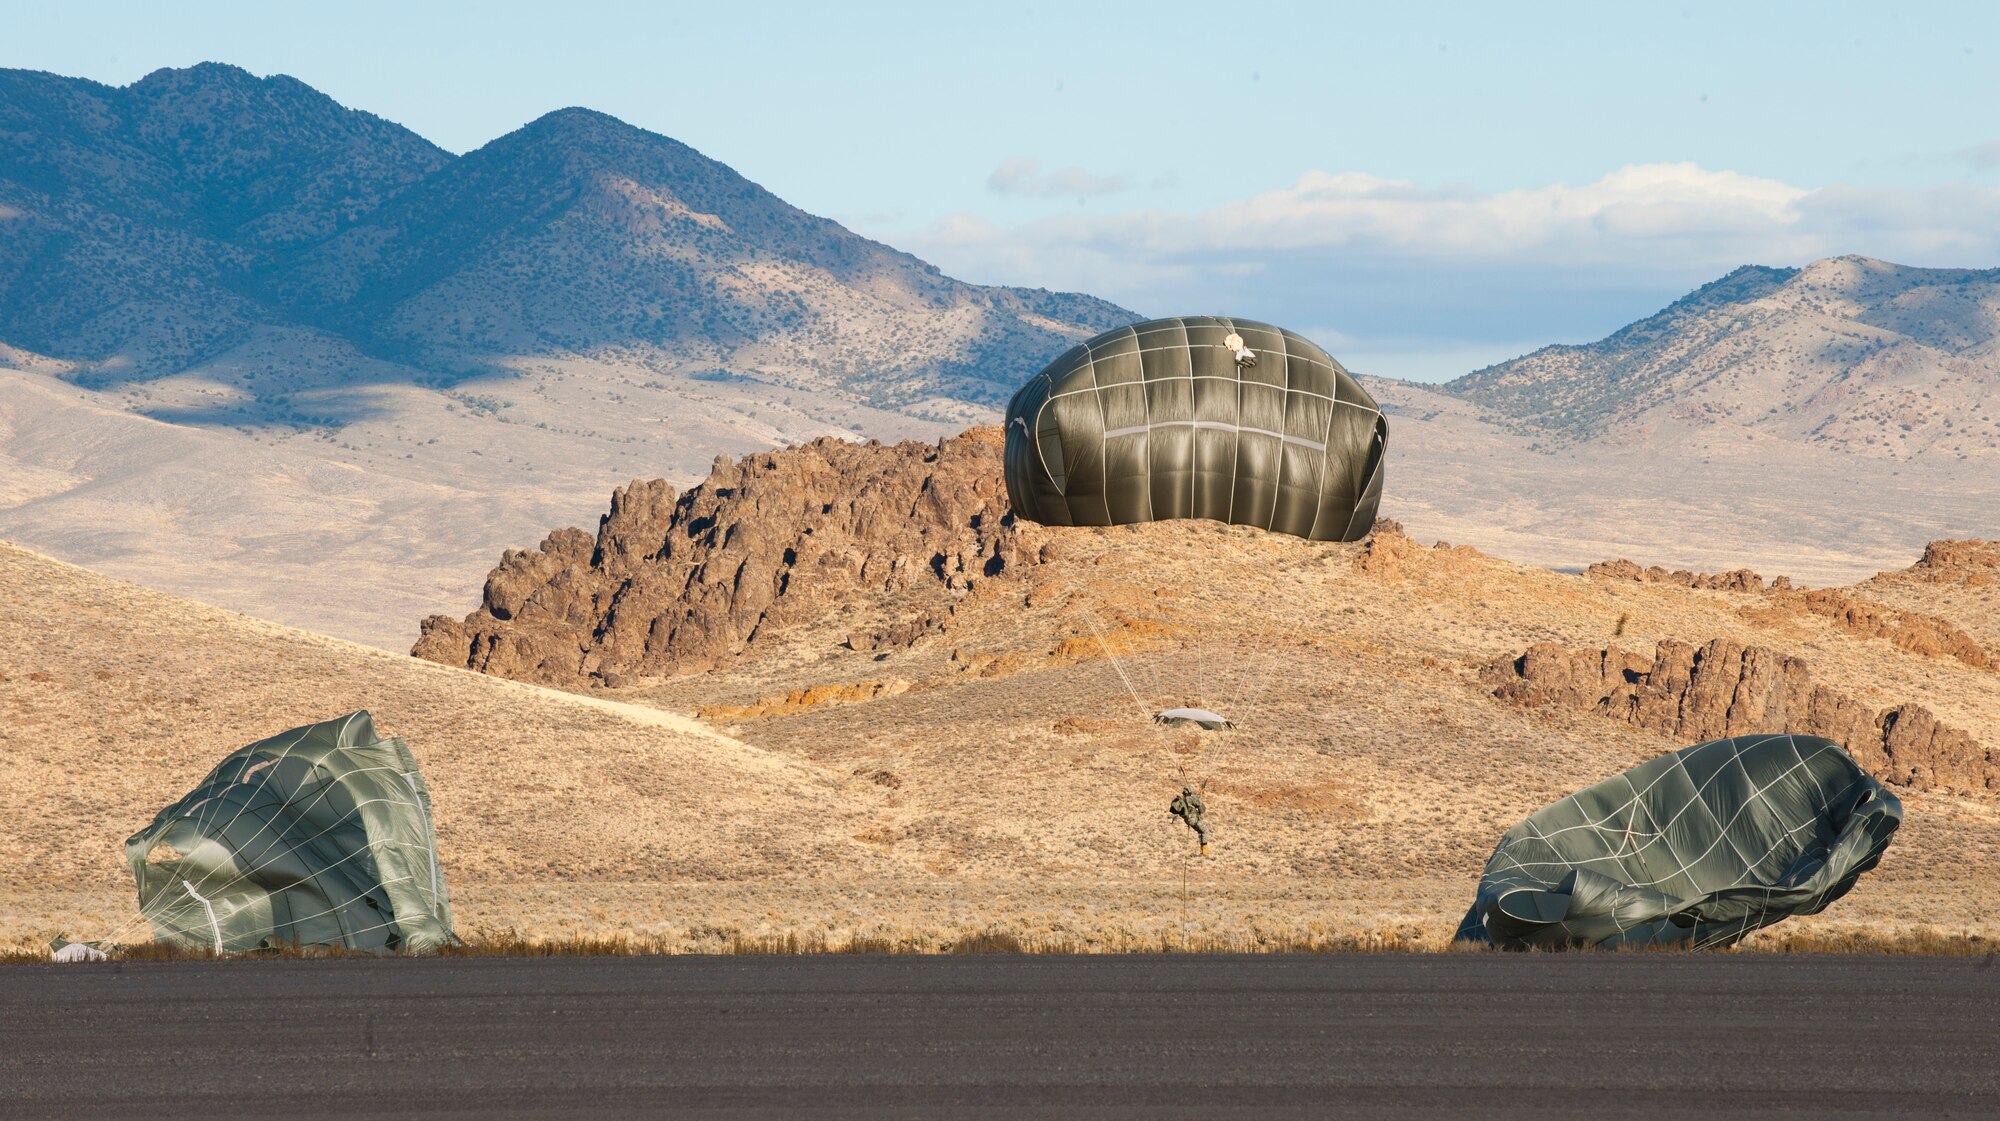 Paratroopers assigned to the 3rd Brigade Combat Team, 82nd Airborne Division, Fort Bragg, N.C., arrive at their drop zone after a jump during the U.S. Air Force Weapons School's Joint Forcible Entry Exercise 14B over the Nevada Test and Training Range Dec. 6, 2014. The NTTR encompasses approximately 2.9 million acres in southern Nevada, and provides a realistic simulated battlespace for joint-service warfighters. (U.S. Air Force photo by Airman First Class Joshua Kleinholz)